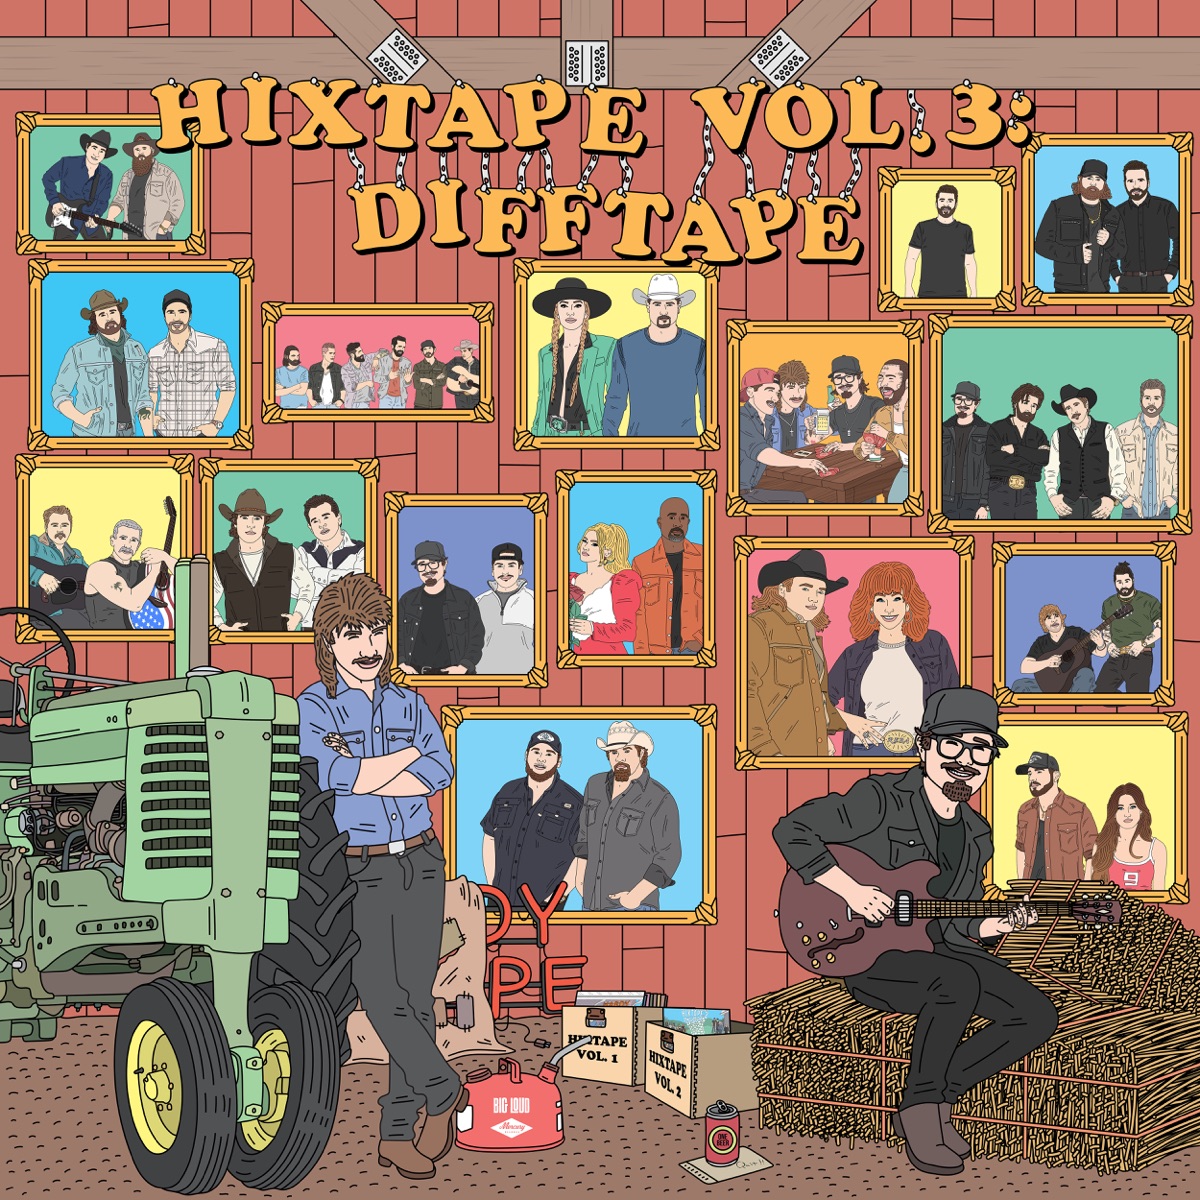 Hixtape+Volume+3+features+songs+that+were+written+by+Joe+Diffie+before+he+passed+away.+Photo+via+Apple+Music